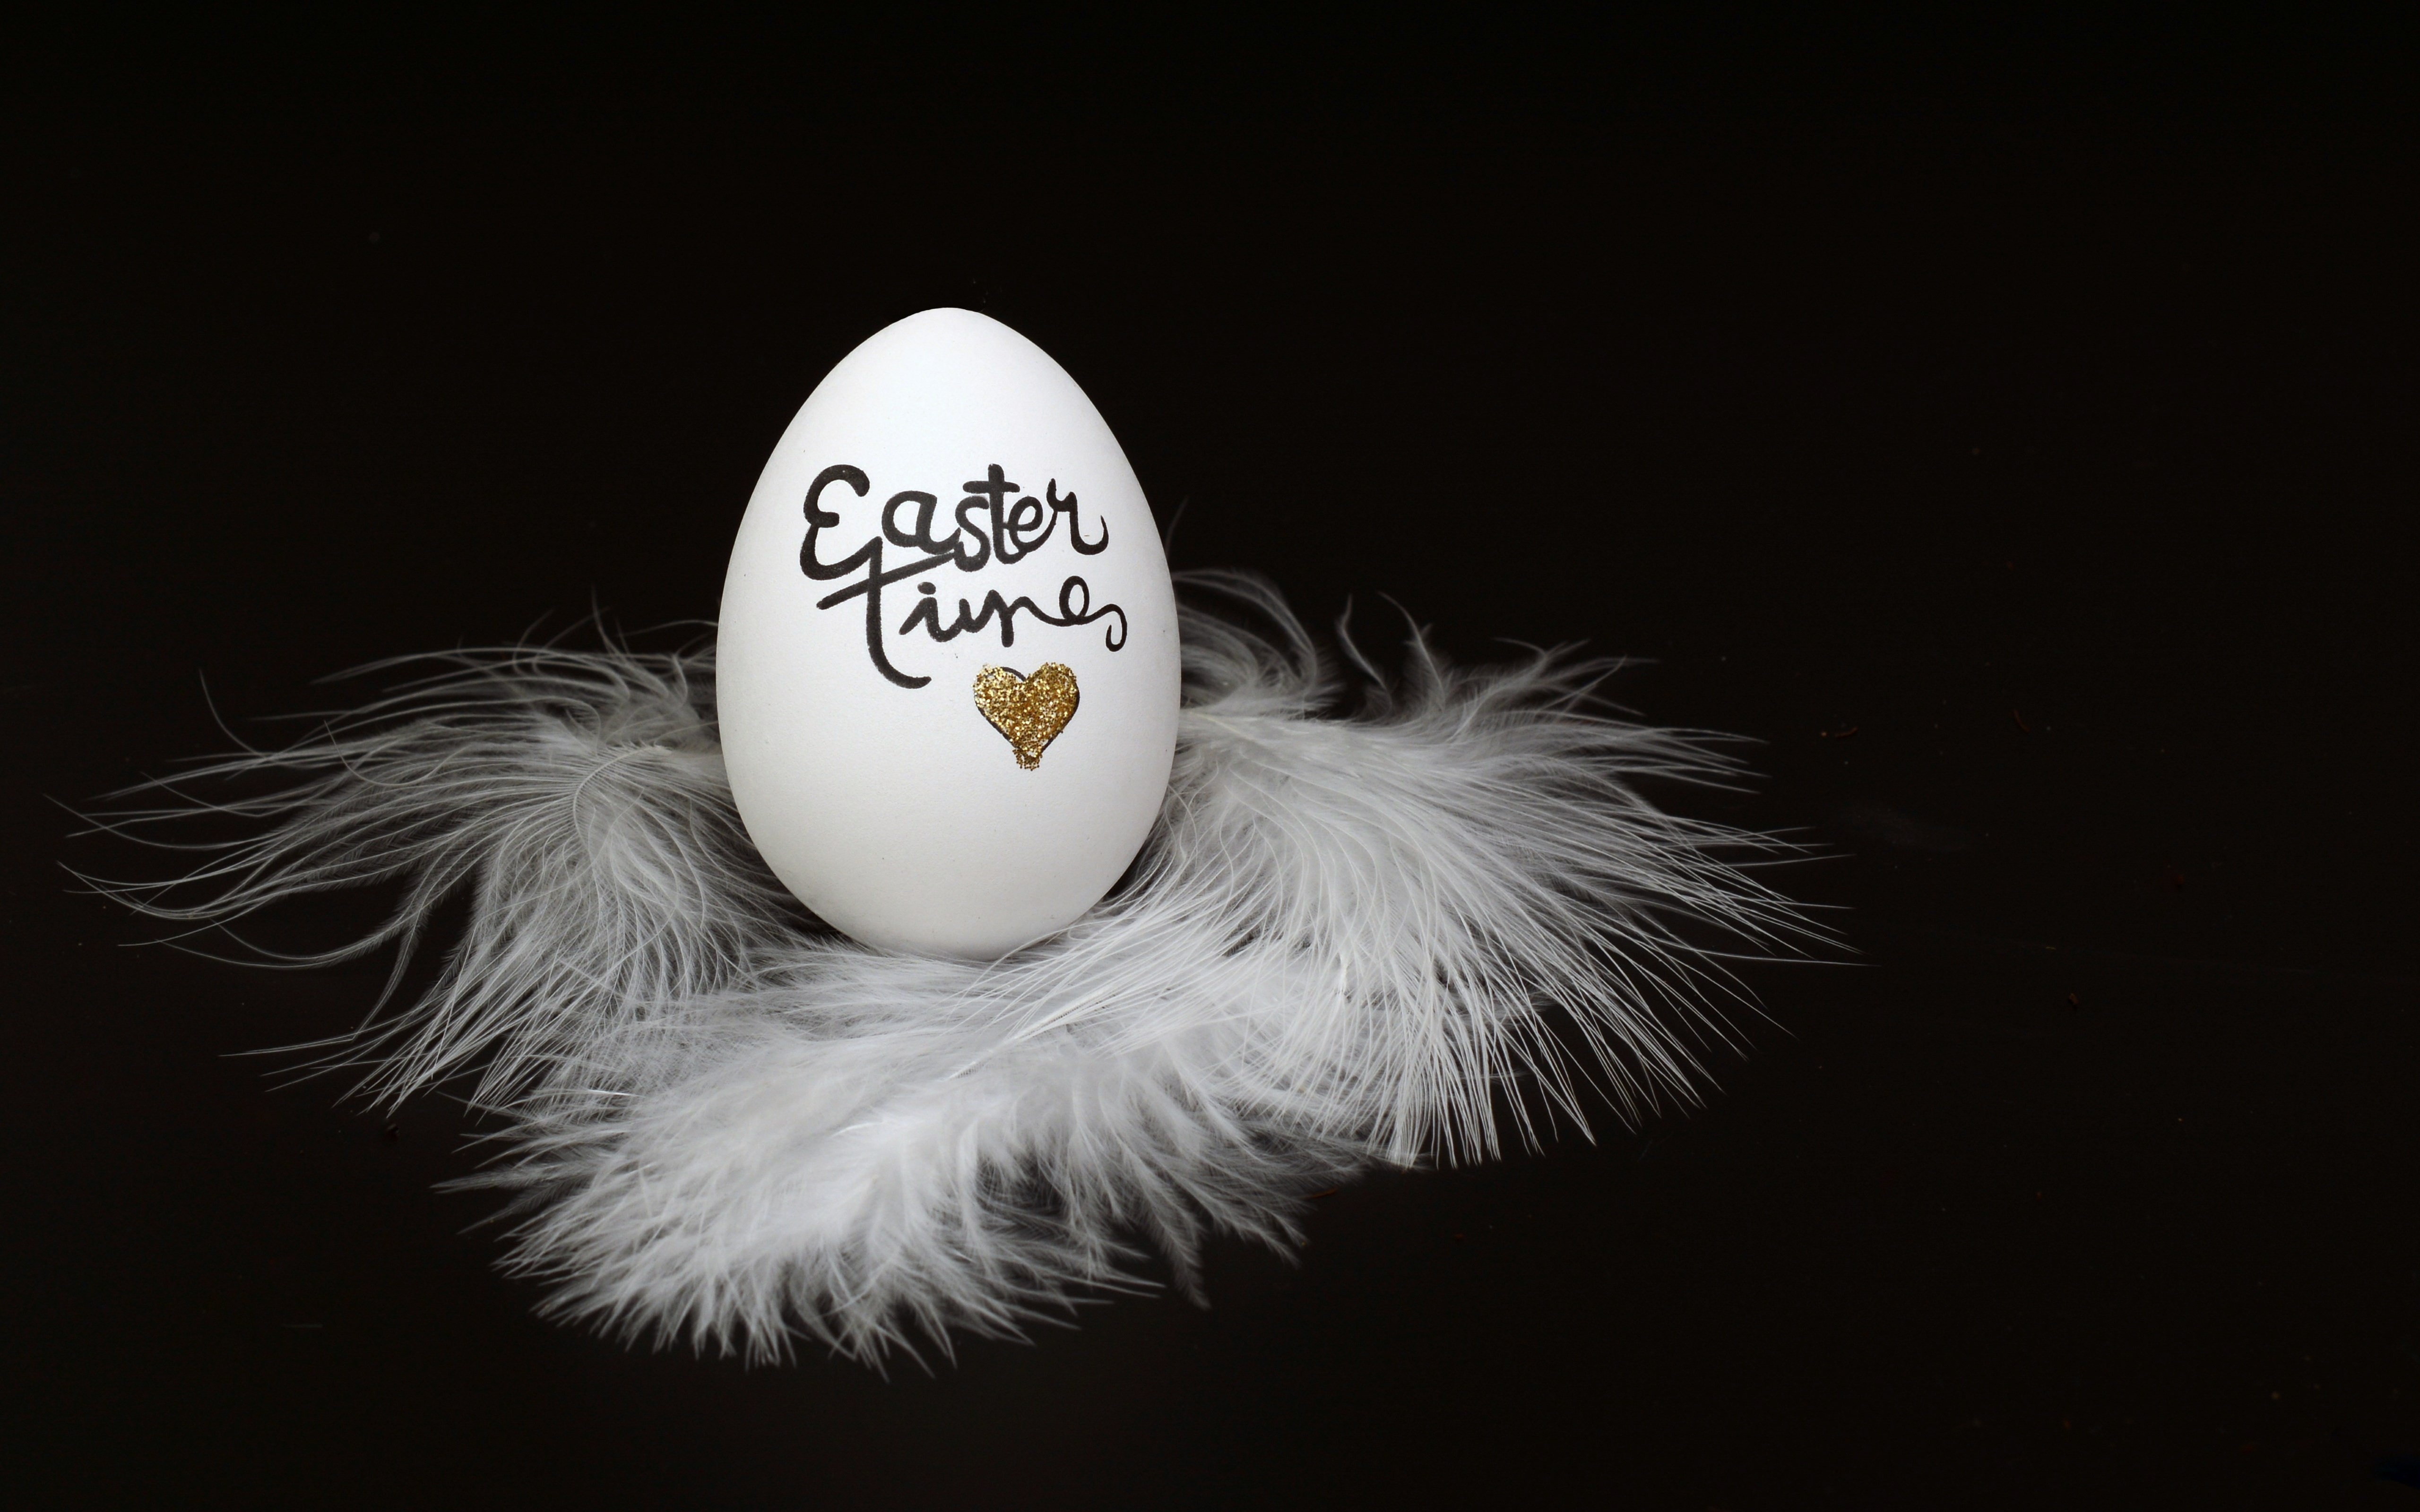 Easter time wallpaper 5120x3200